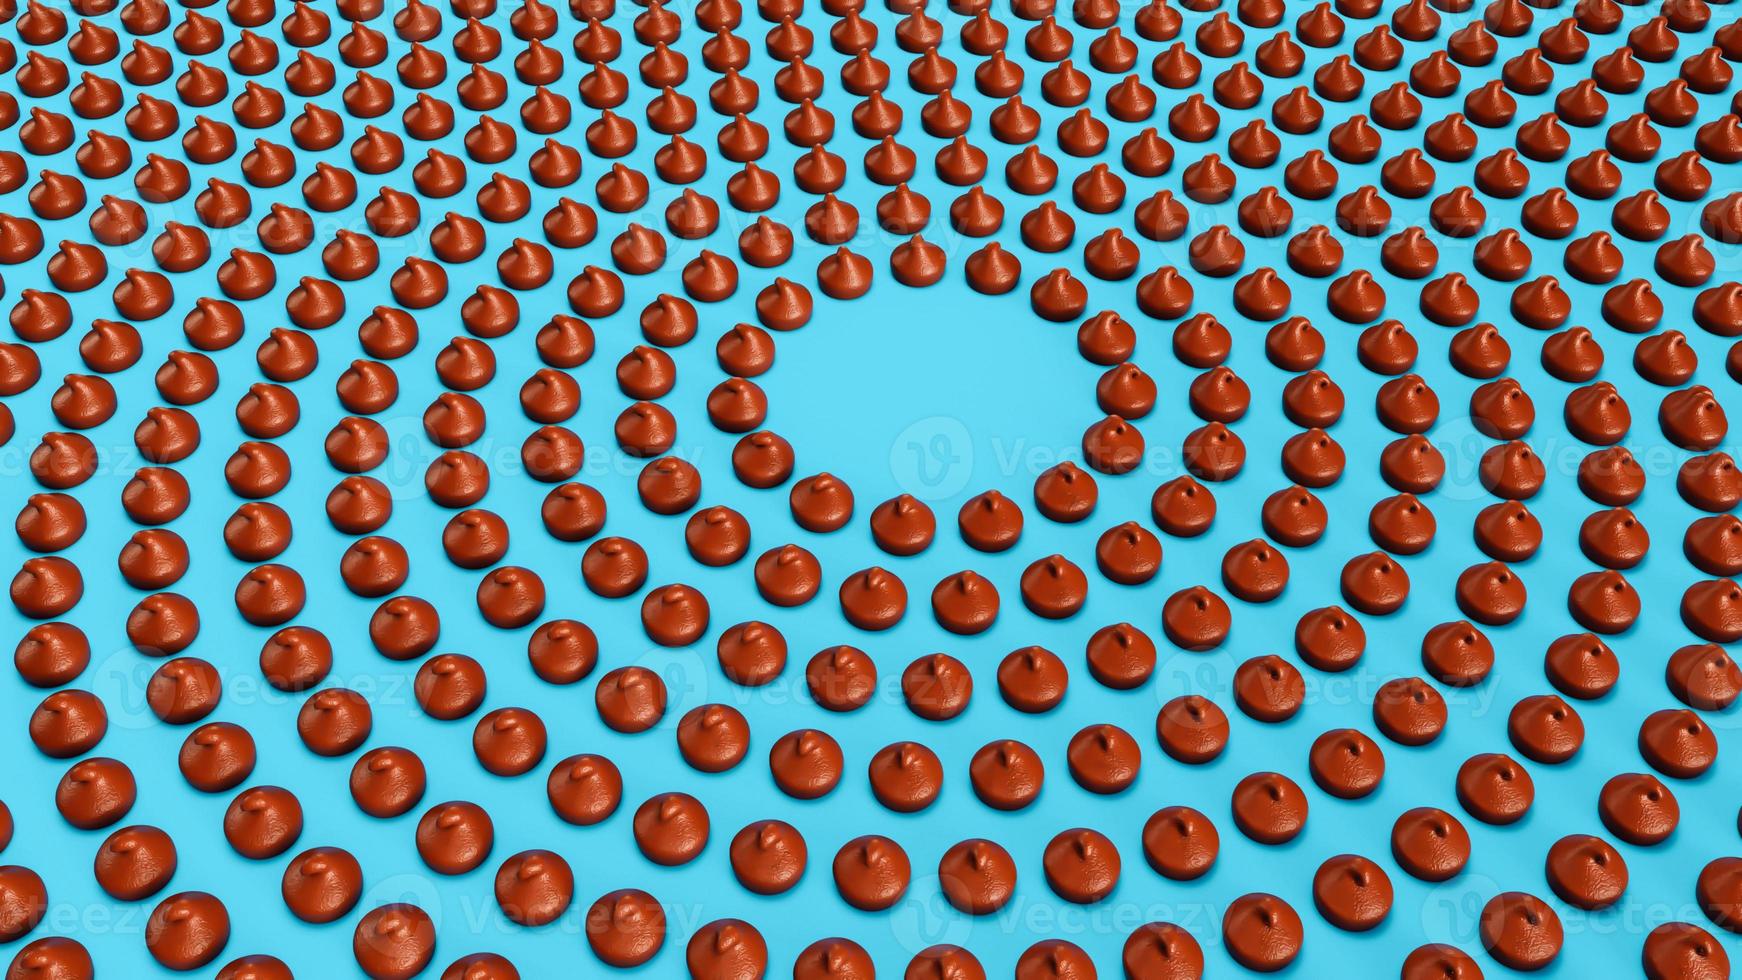 Rows of Chocolate Chips morsels or drops around the circle on isolated background 3d illustration photo